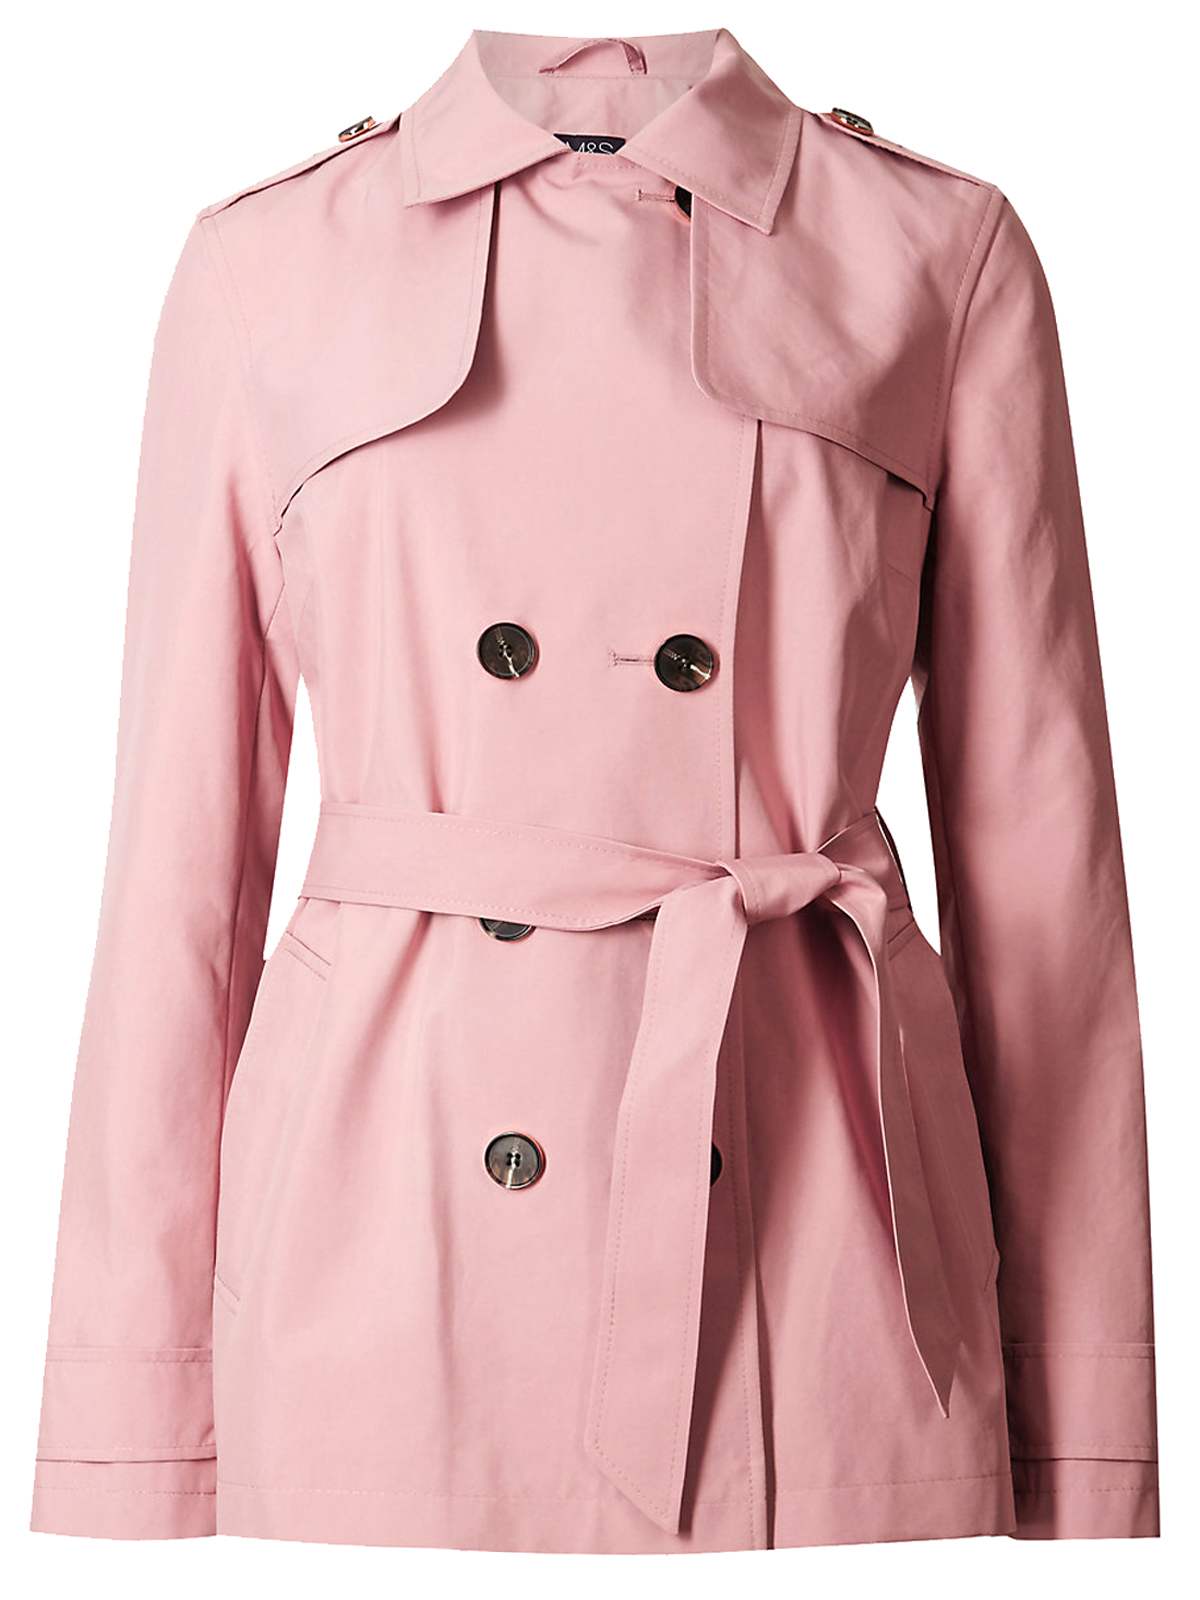 Marks and Spencer - - M&5 BLUSH-PINK Belted Trench Coat with Stormwear ...